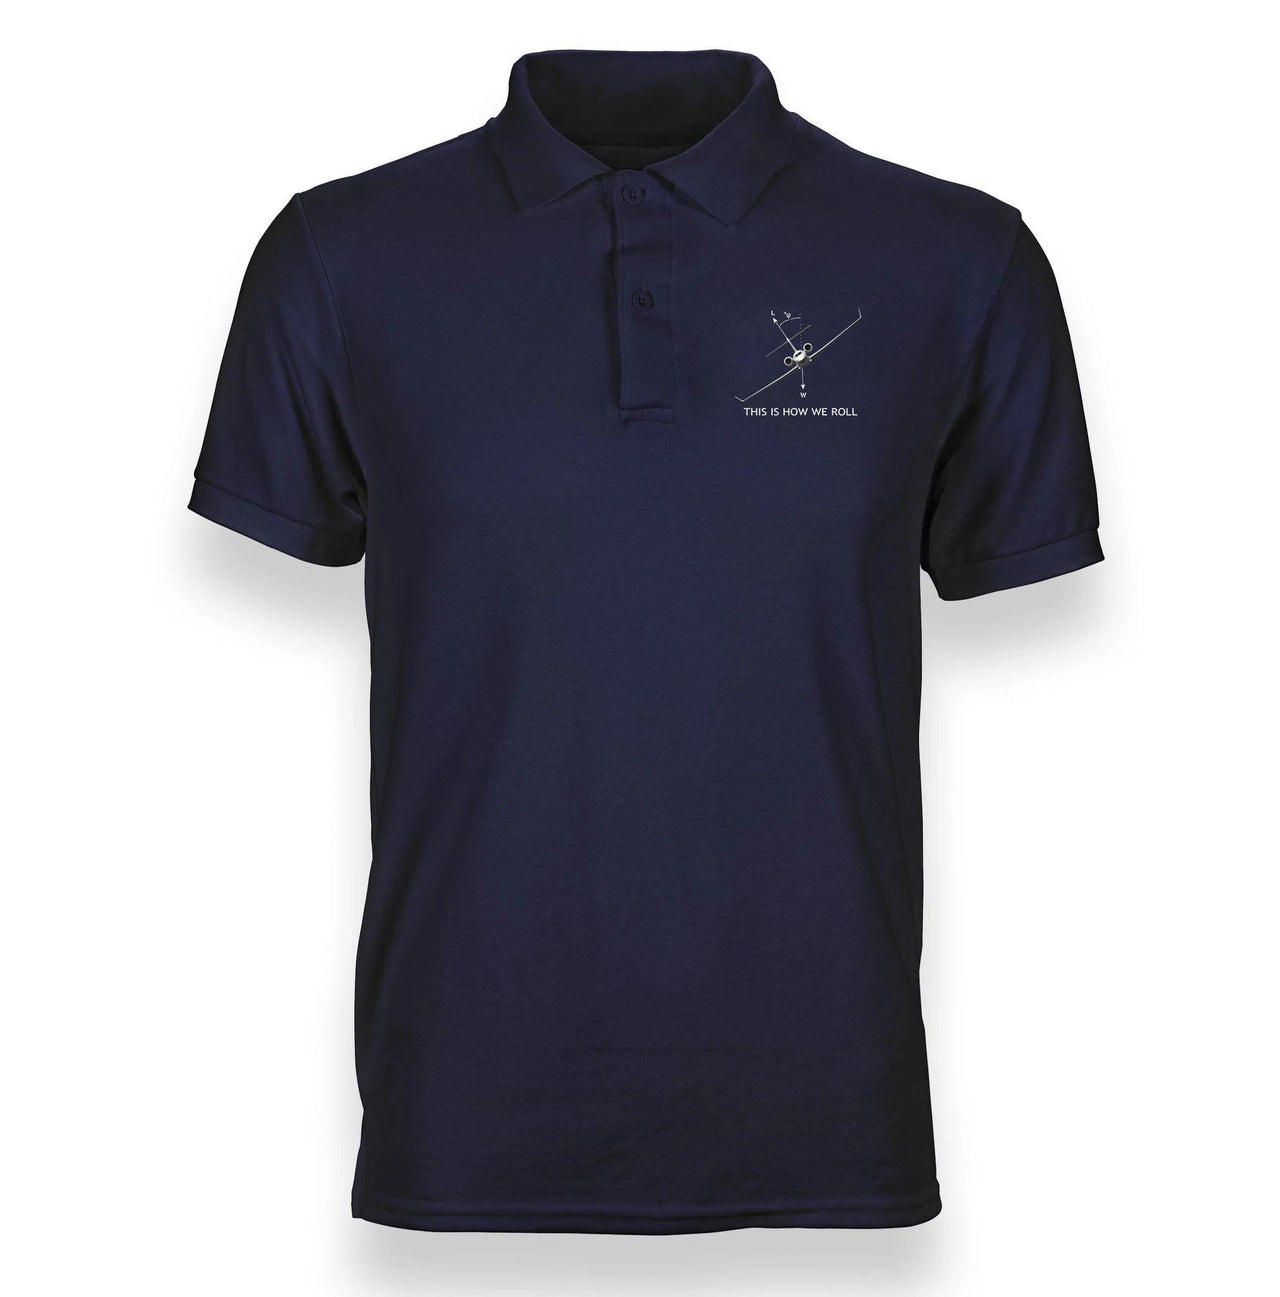 THIS IS HOW WE ROLL POLO SHIRT THE AV8R